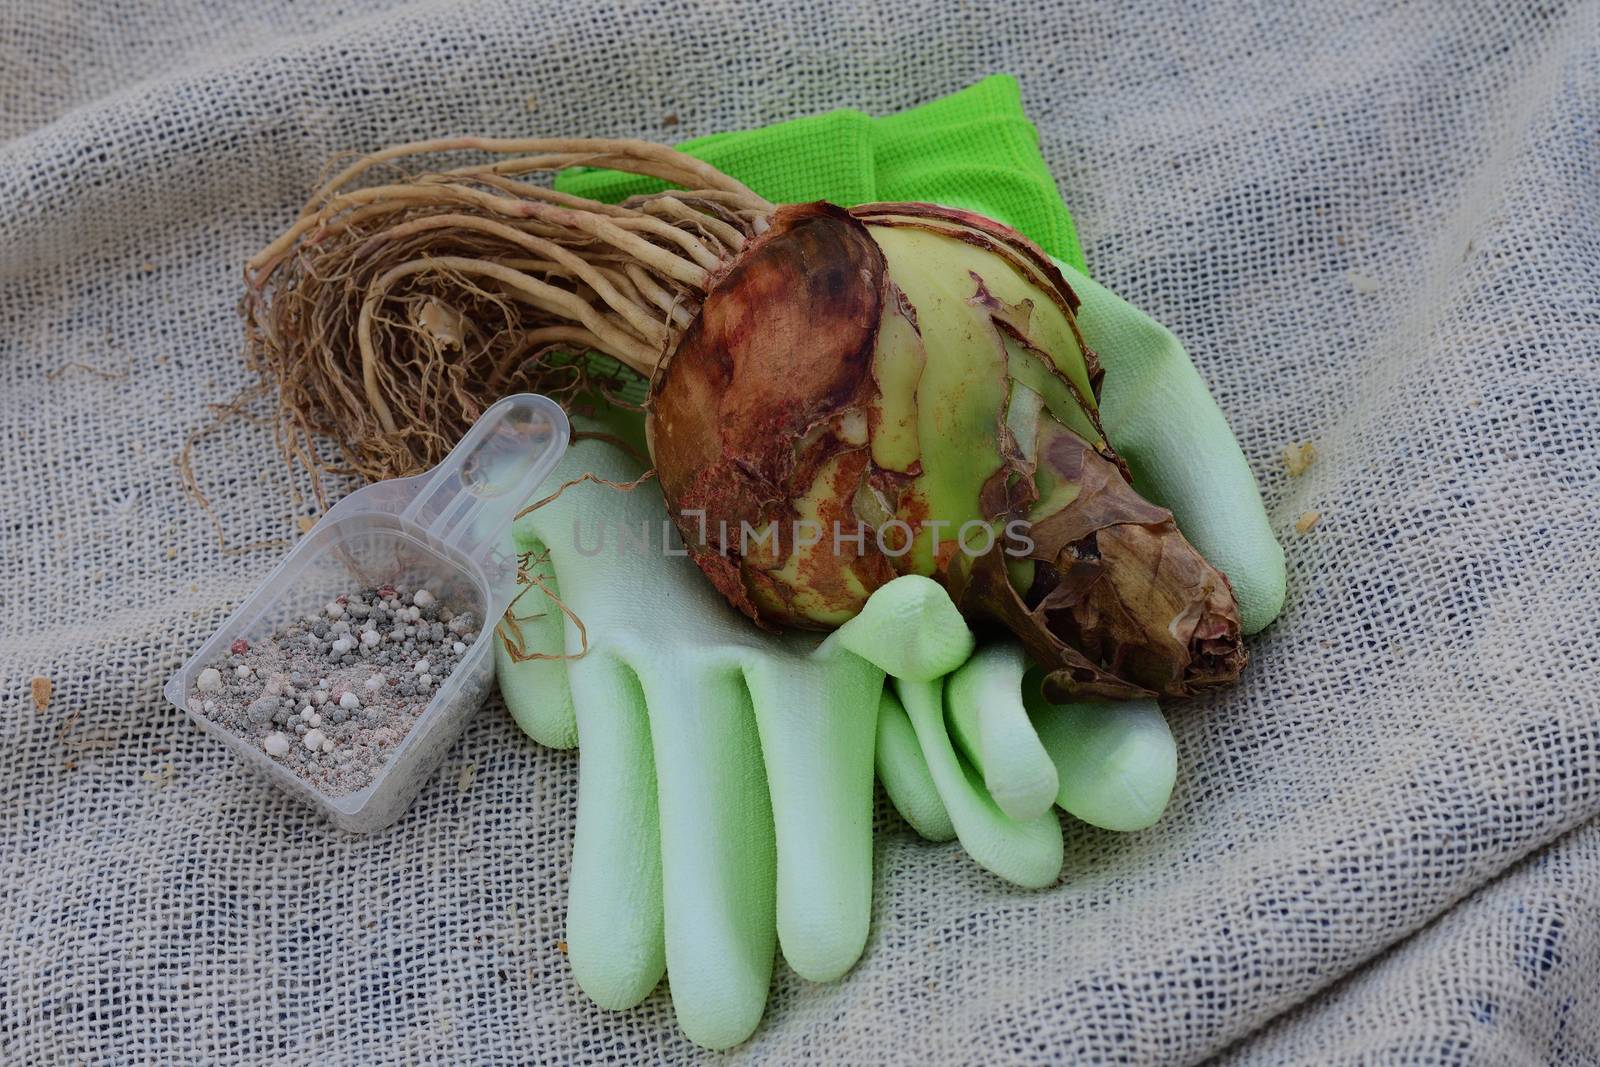 A close-up photo of a premium quality Amaryllis (Hippeastrum) bulb, ready to be planted; garden gloves and a scoop of bulb fertilizer by Marshalkina